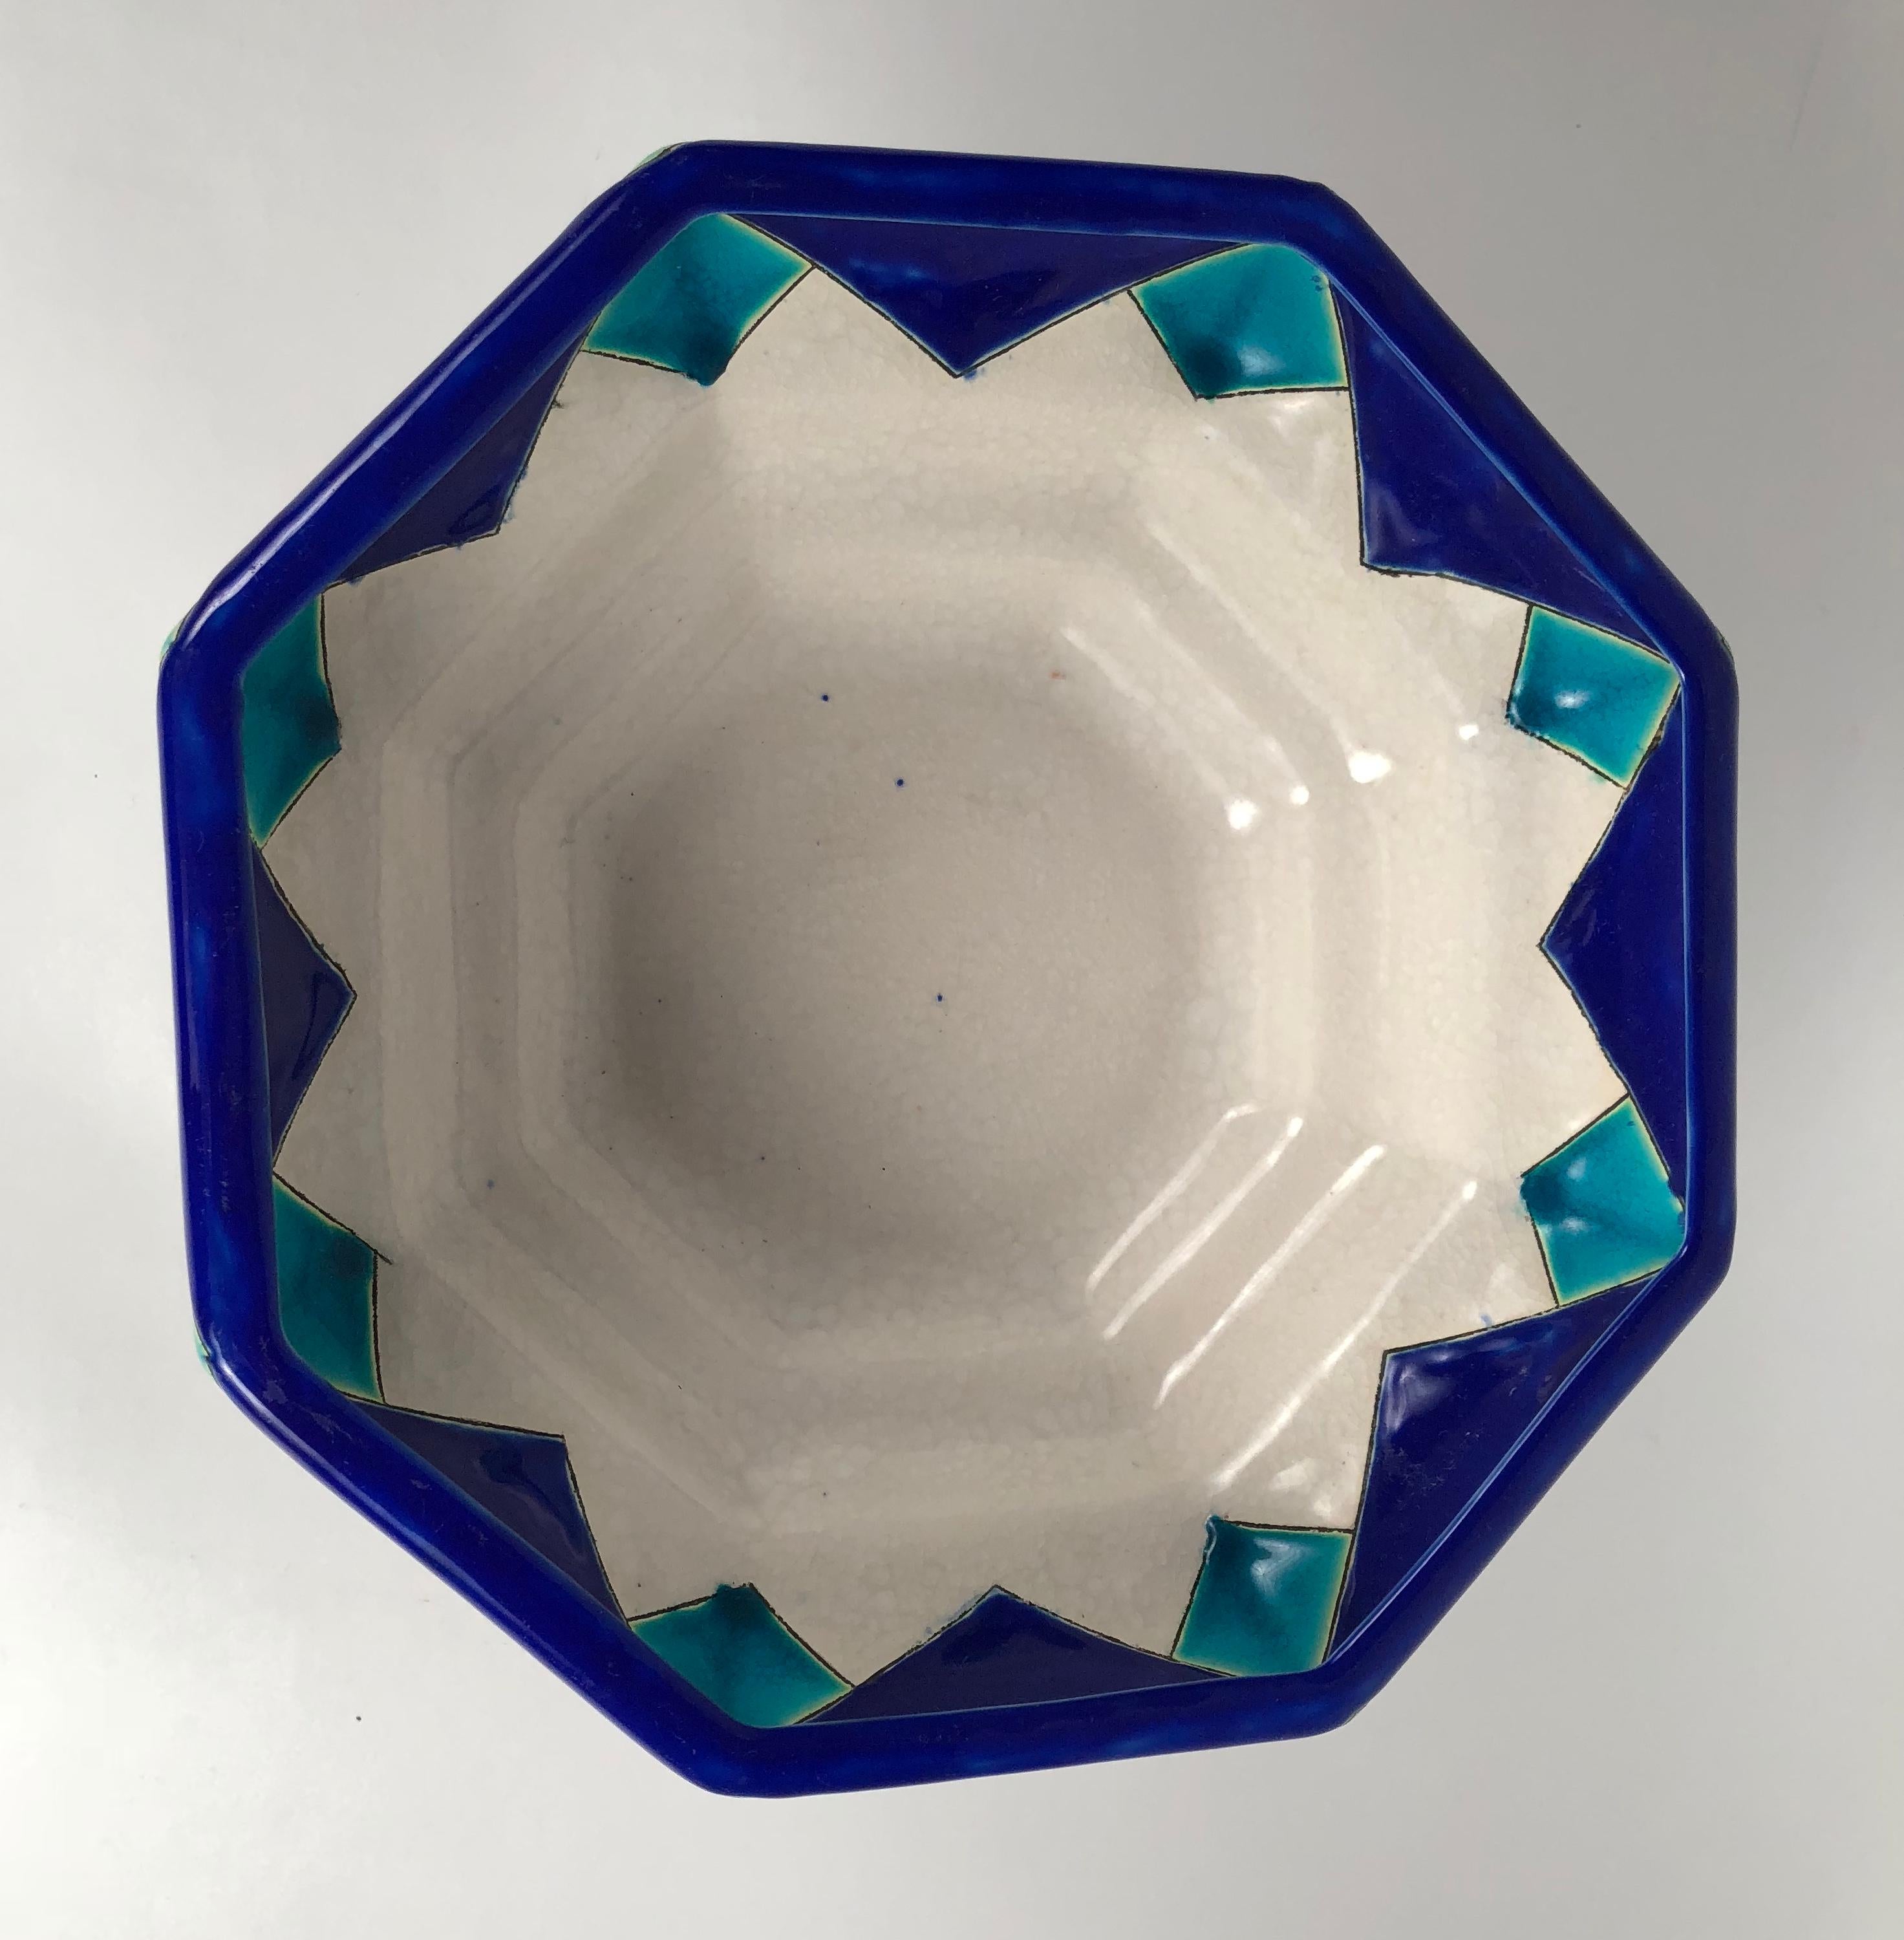 Art Deco Period Blue Turquoise and White Ceramic Footed Bowl by Boch Frères (Belgisch)